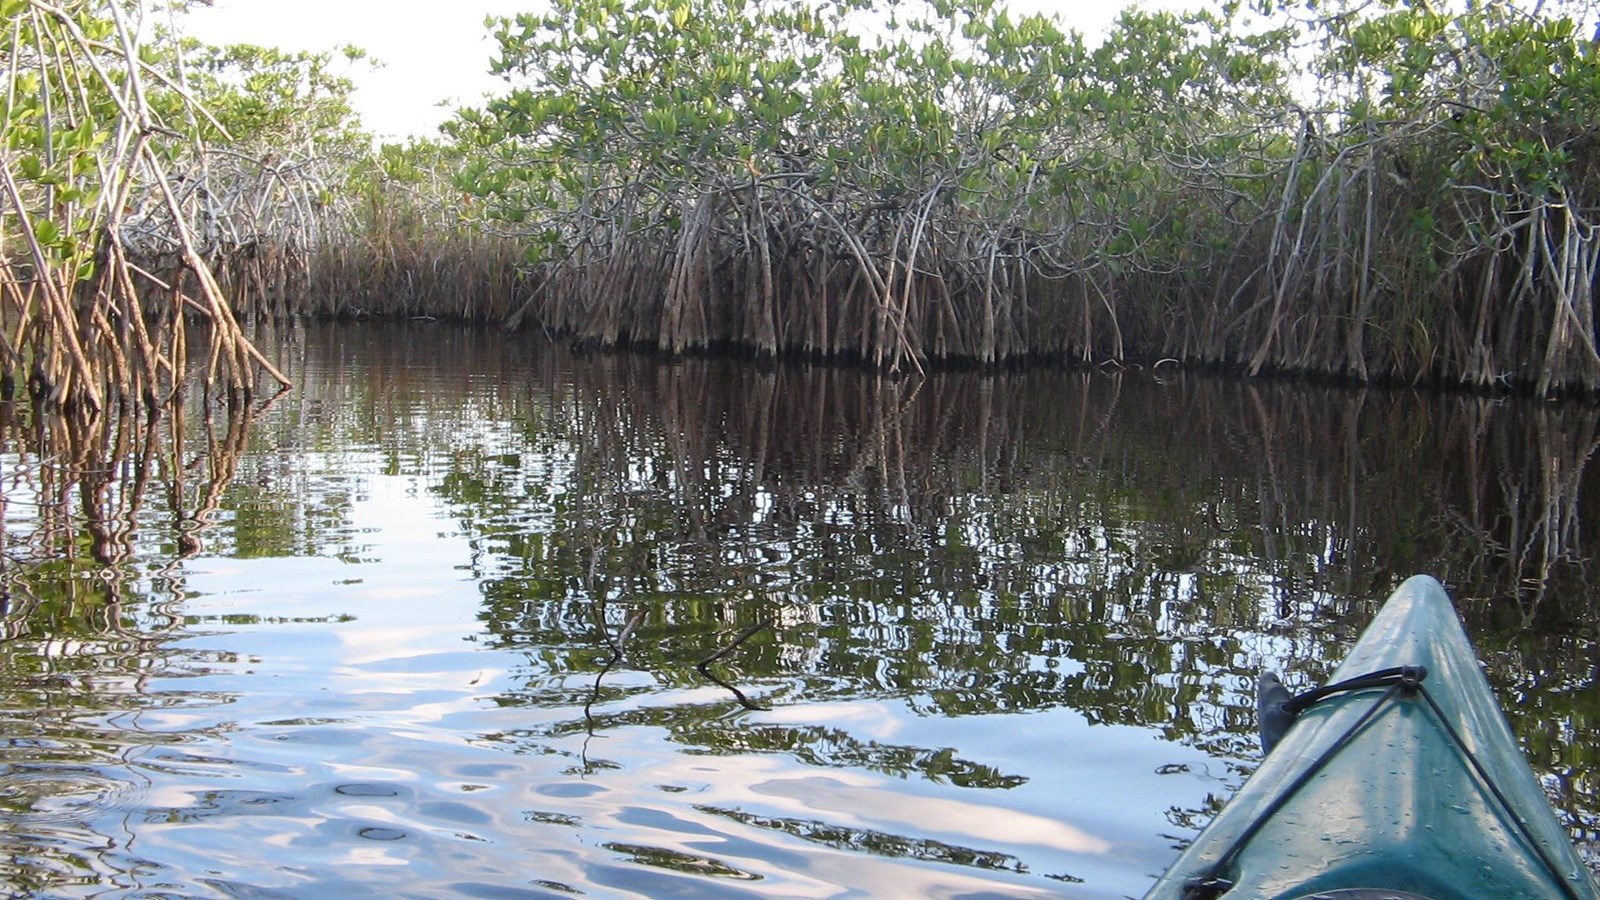 From the bow of a green kayak, the prop roots of a red mangrove tree reach into the calm water